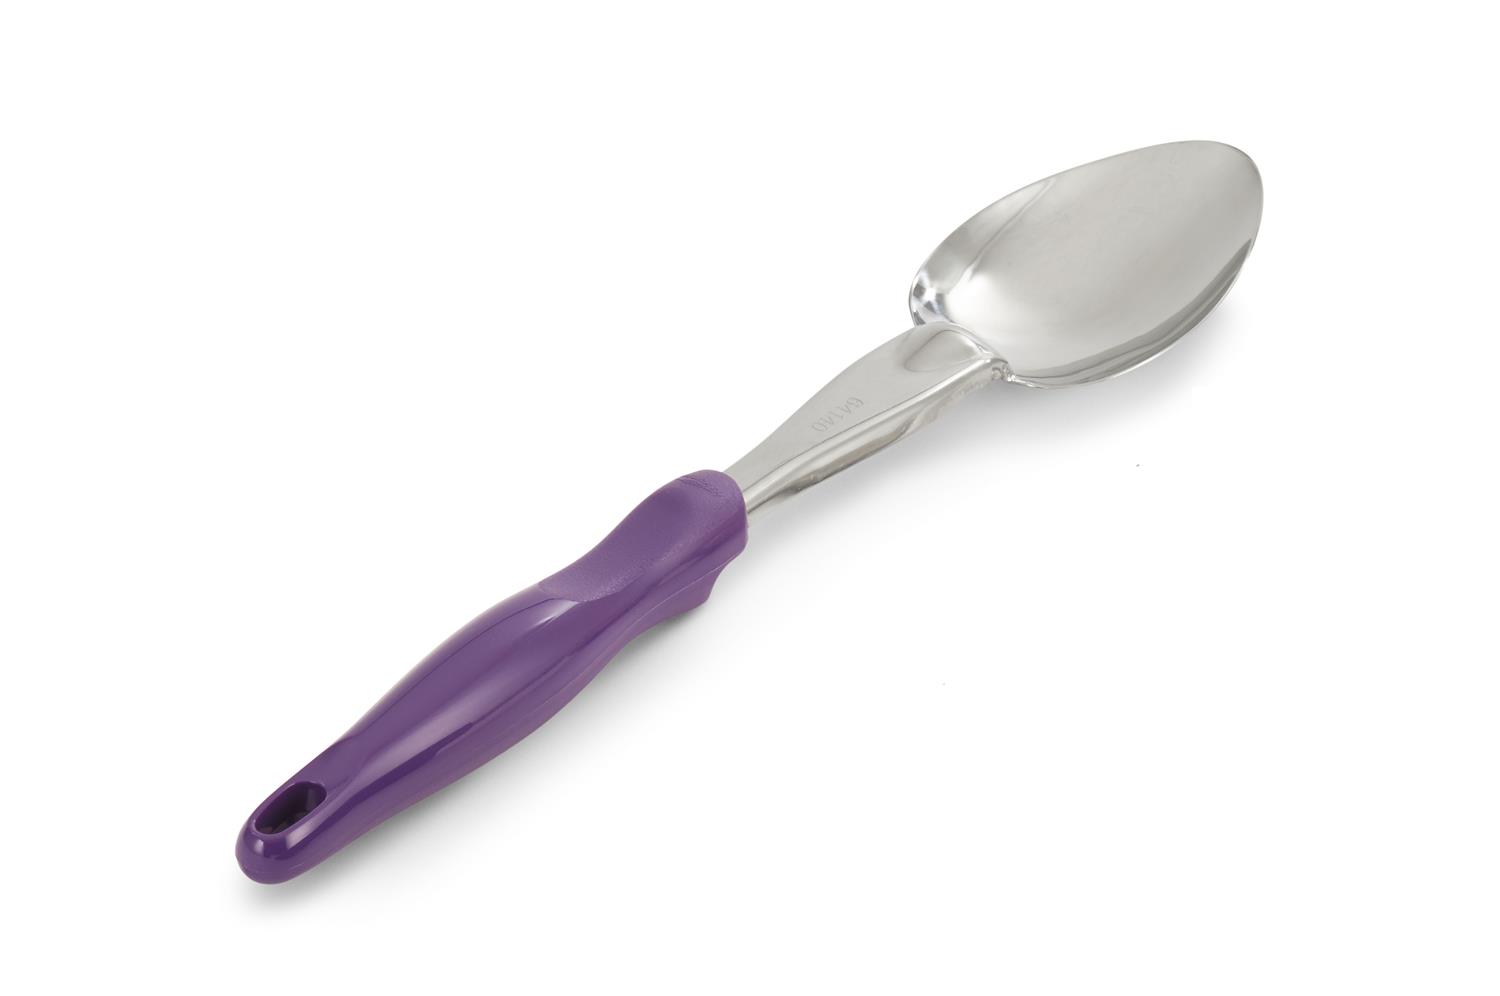 Vollrath 6414080 Heavy-Duty Stainless Steel Solid Basting Spoon with Ergo Grip handle